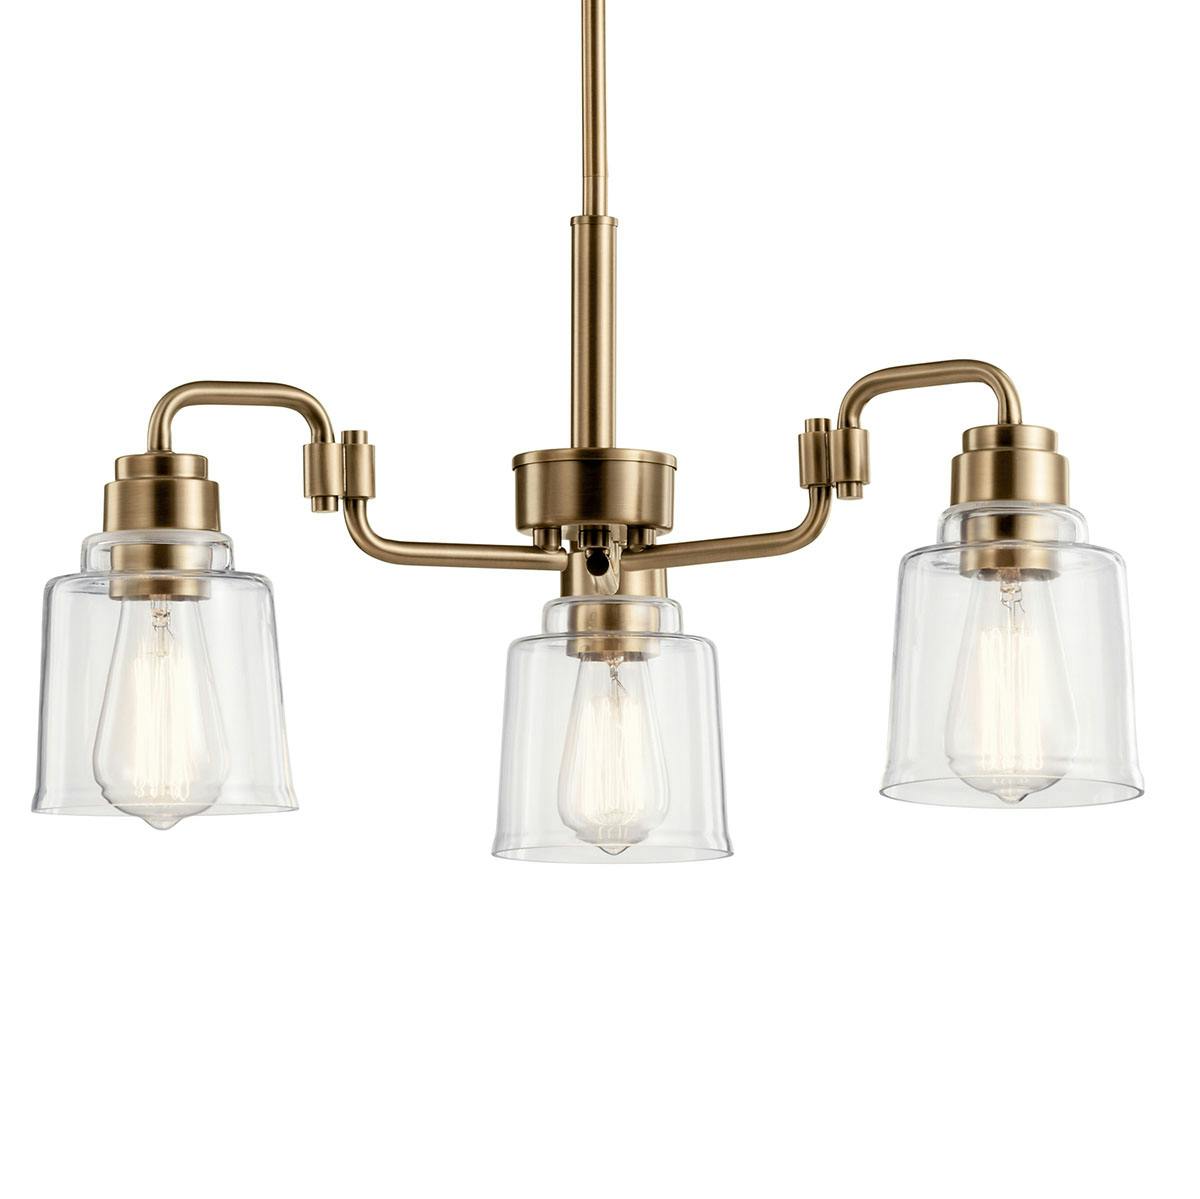 Aivian 23" Chandelier Brass Finish without the canopy on a white background